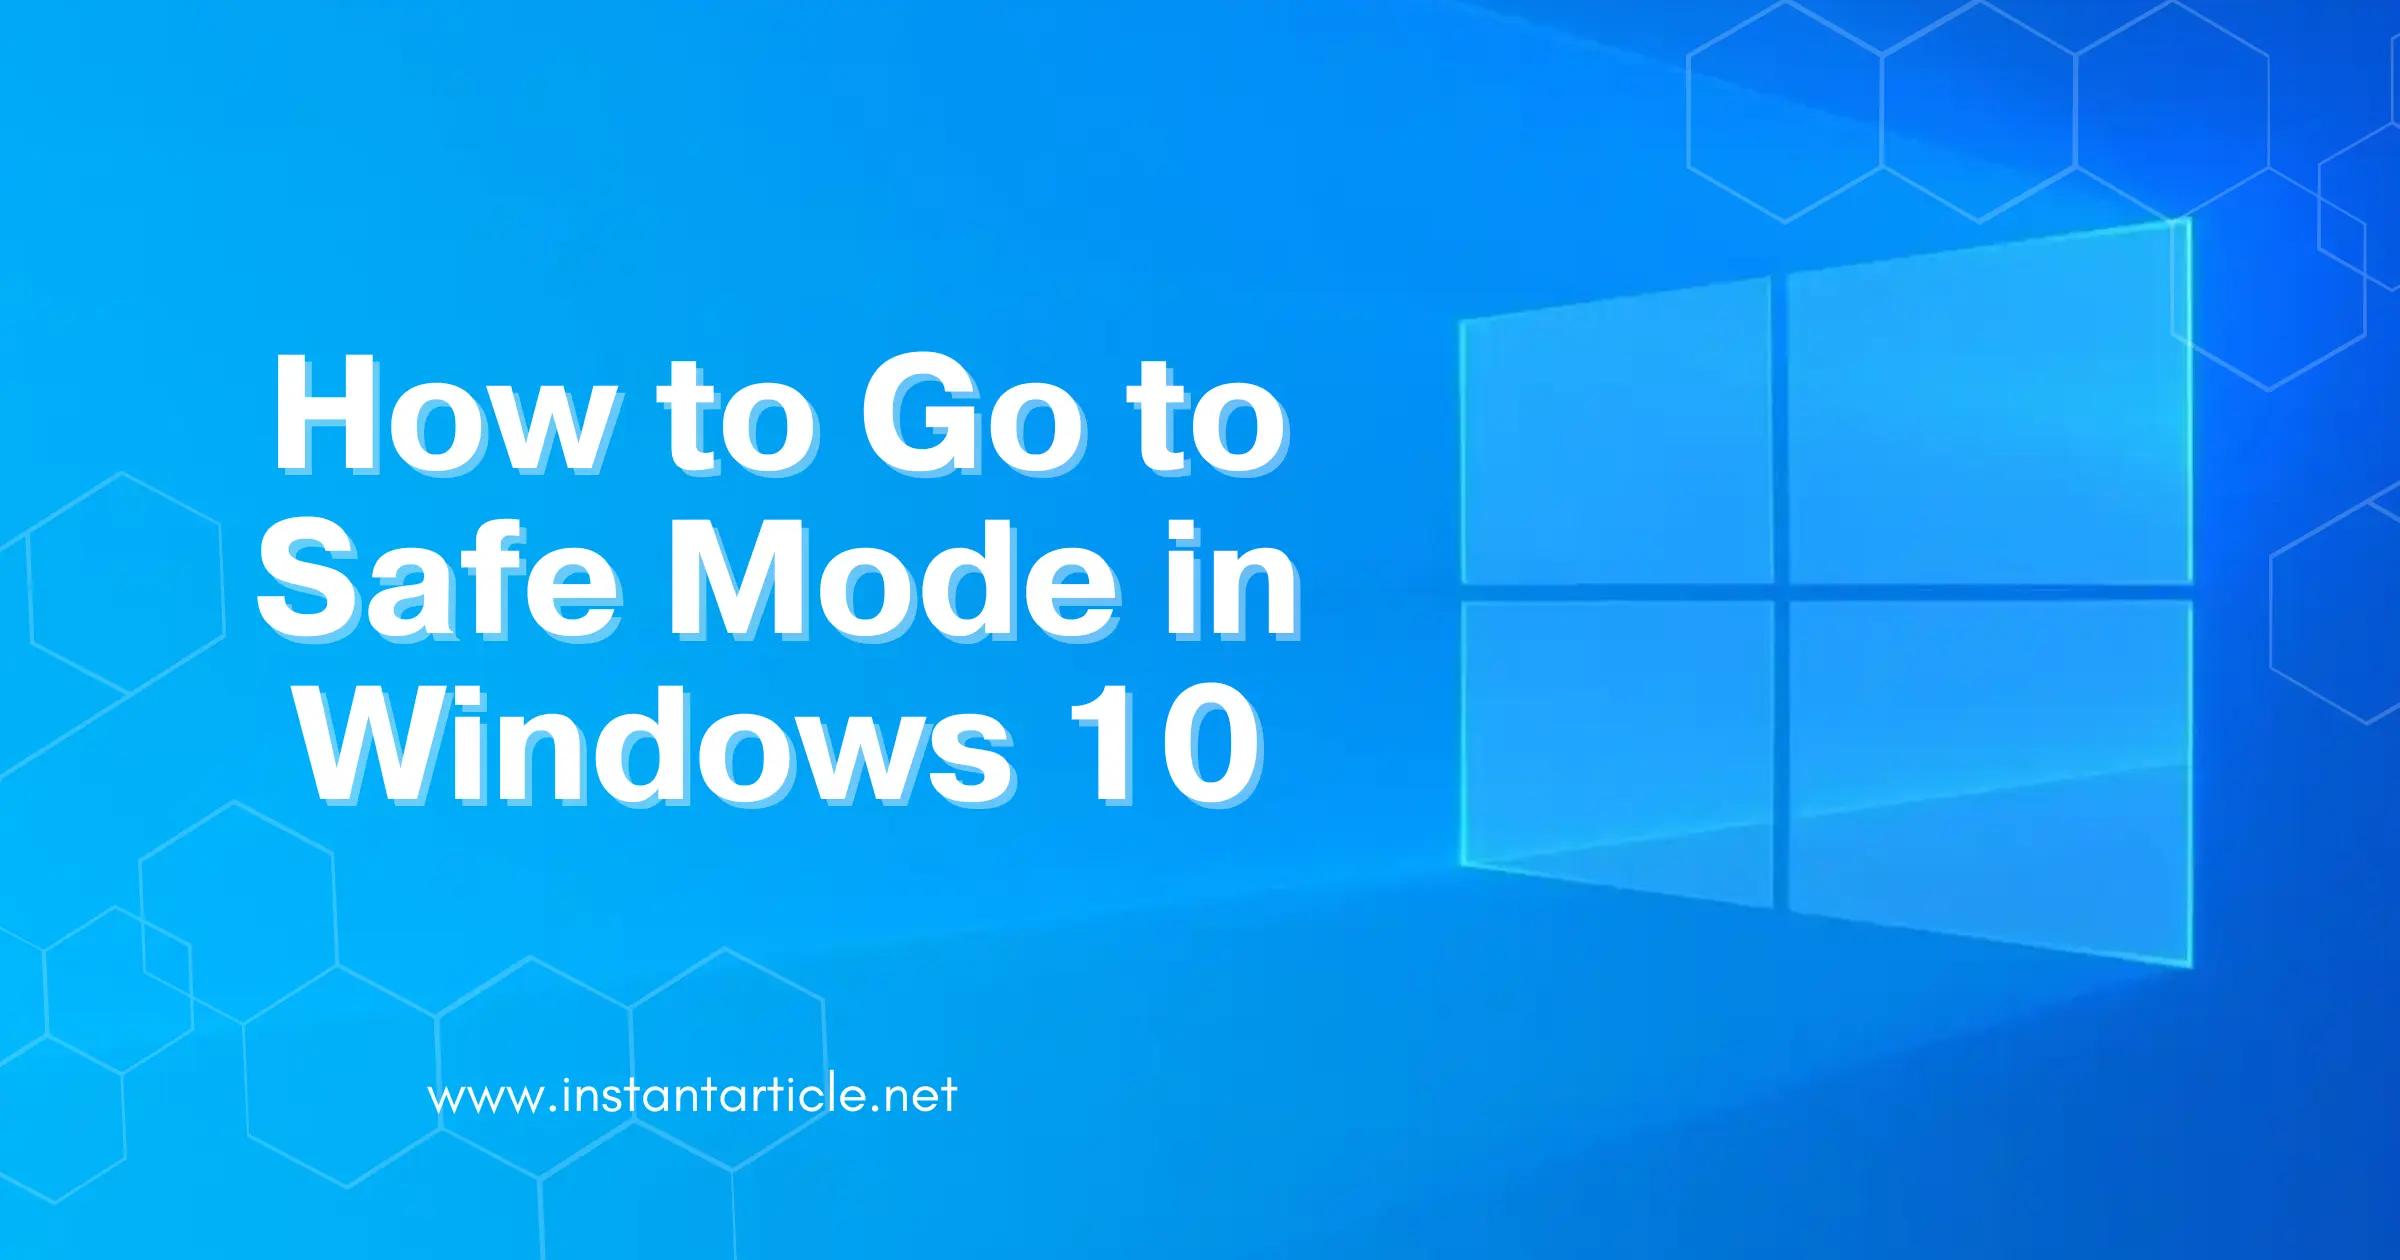 Windows 10 logo with the title "How to Go to Safe Mode in Windows 10" and website URL instantarticle.net.